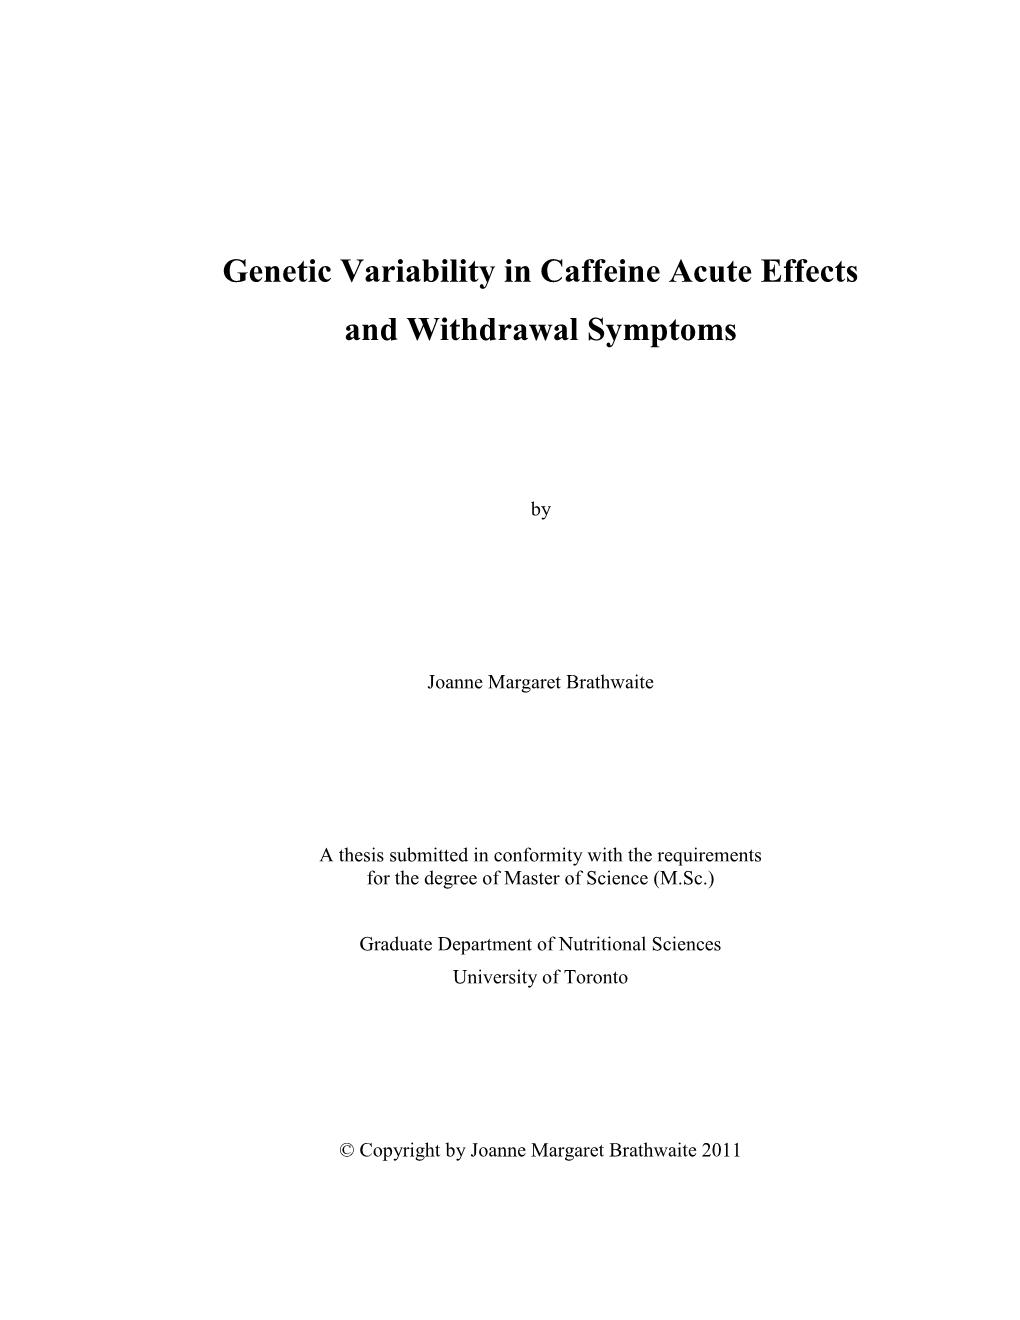 Genetic Variability in Caffeine Acute Effects and Withdrawal Symptoms